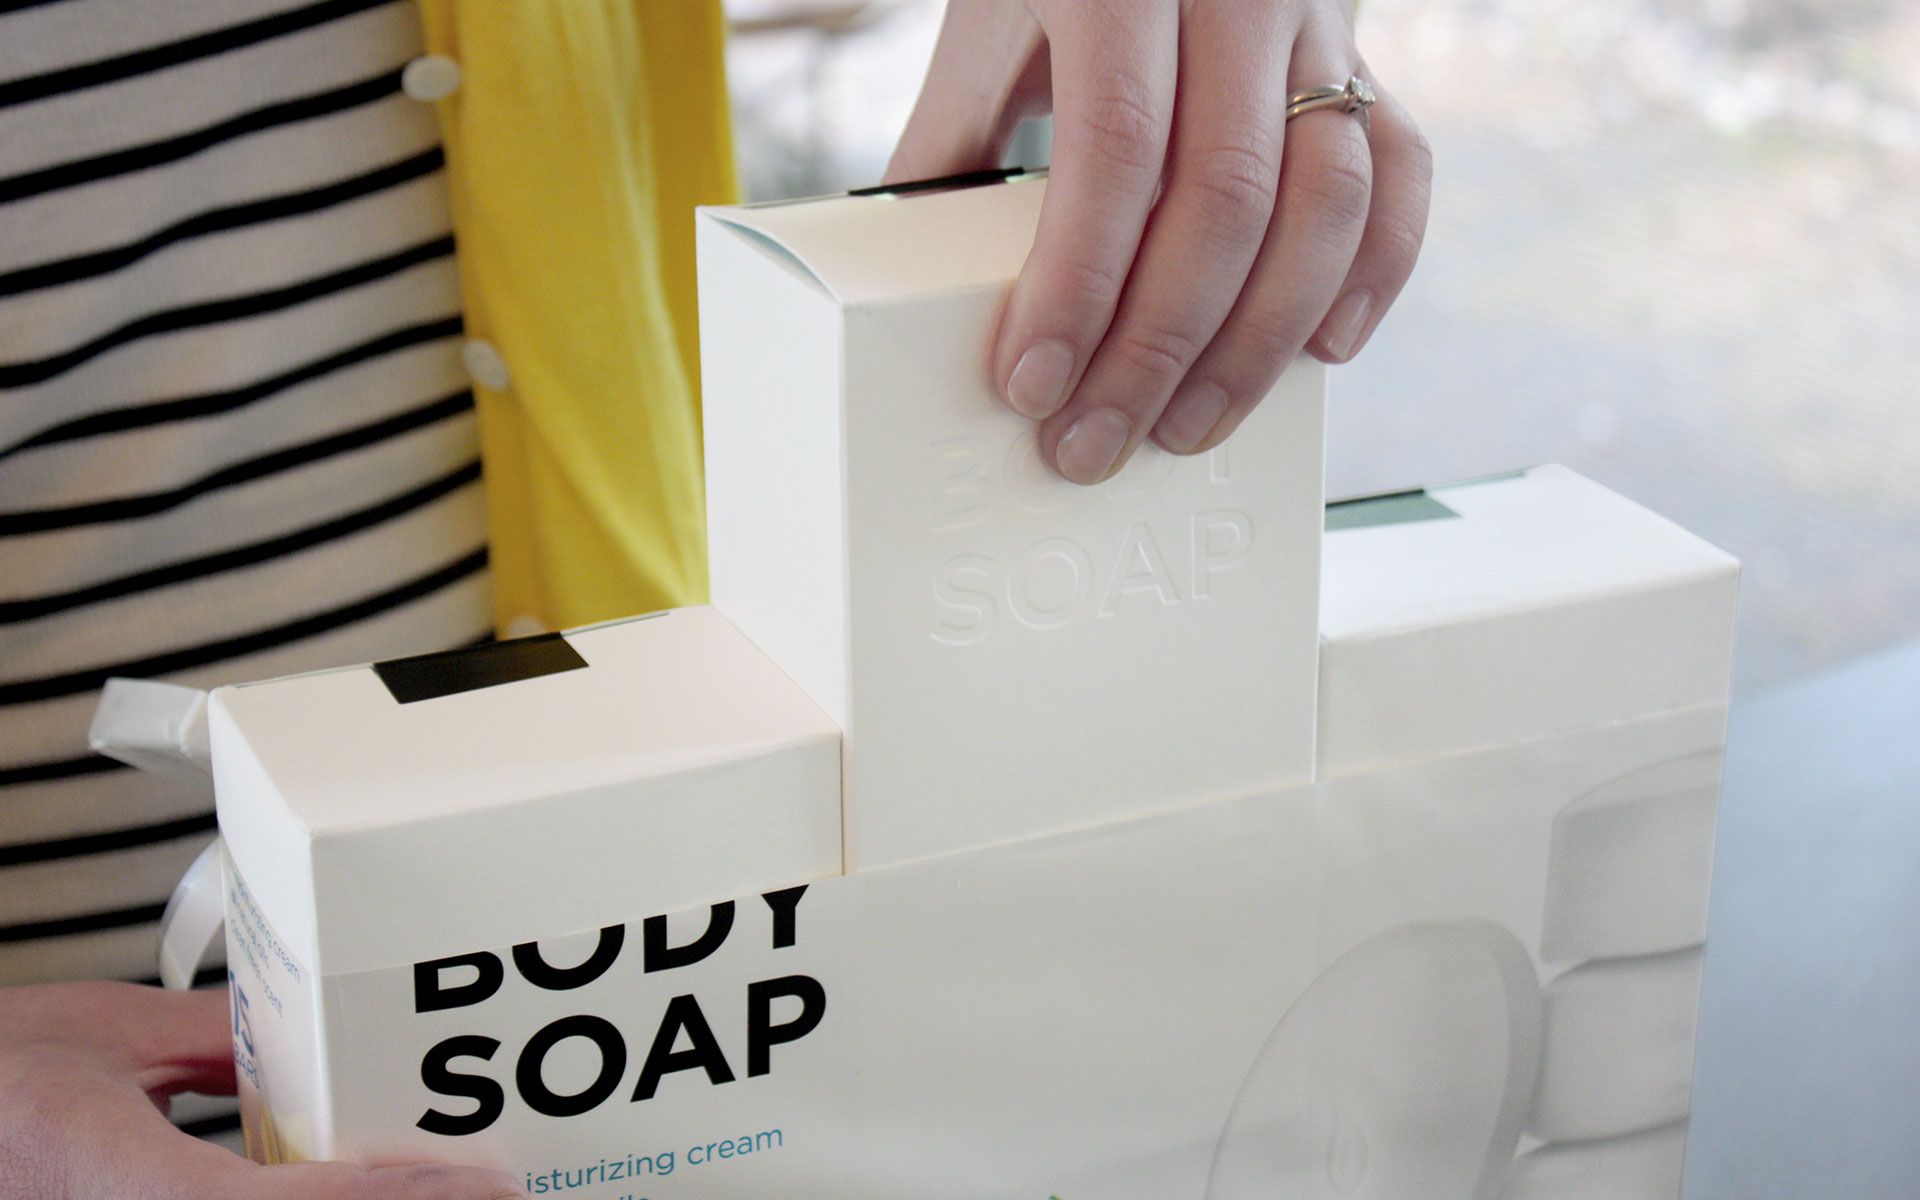 Person pulling a white rectangular box out of a pack of 3 that is wrapped in a thin plastic material that reads “Body Soap”